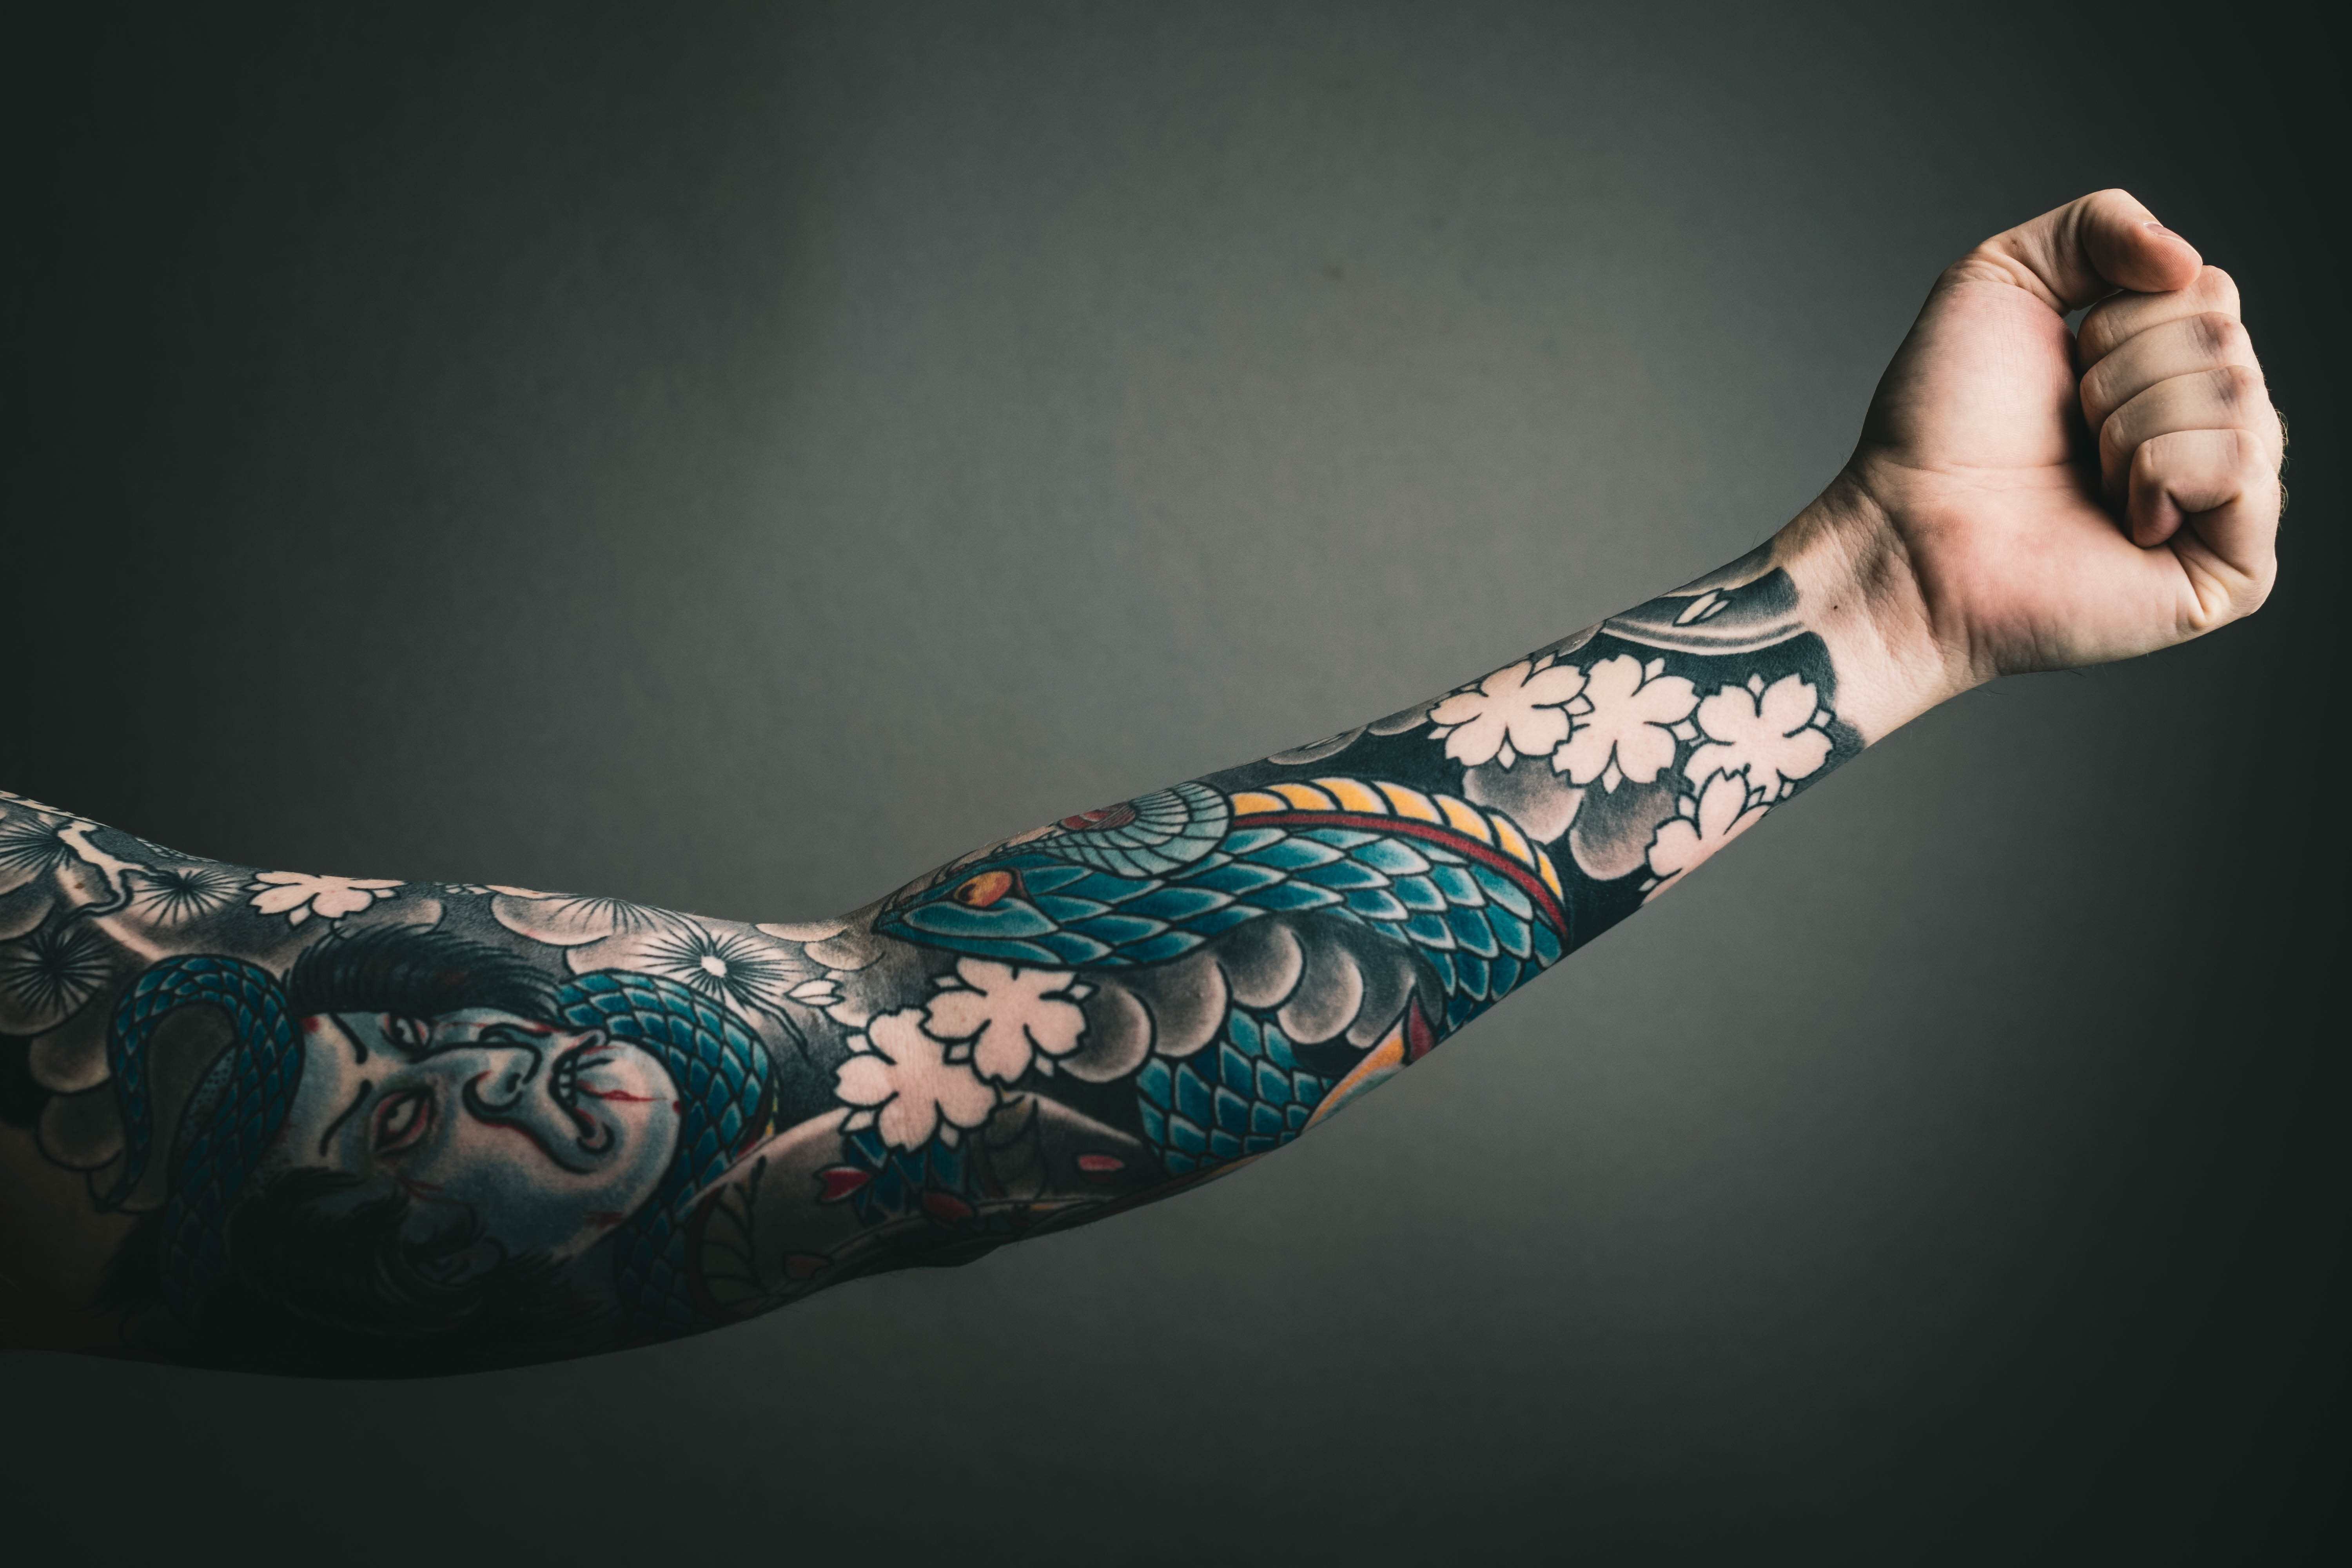 Some of the Most Common Tattoo Styles According to a Tattoo Artist